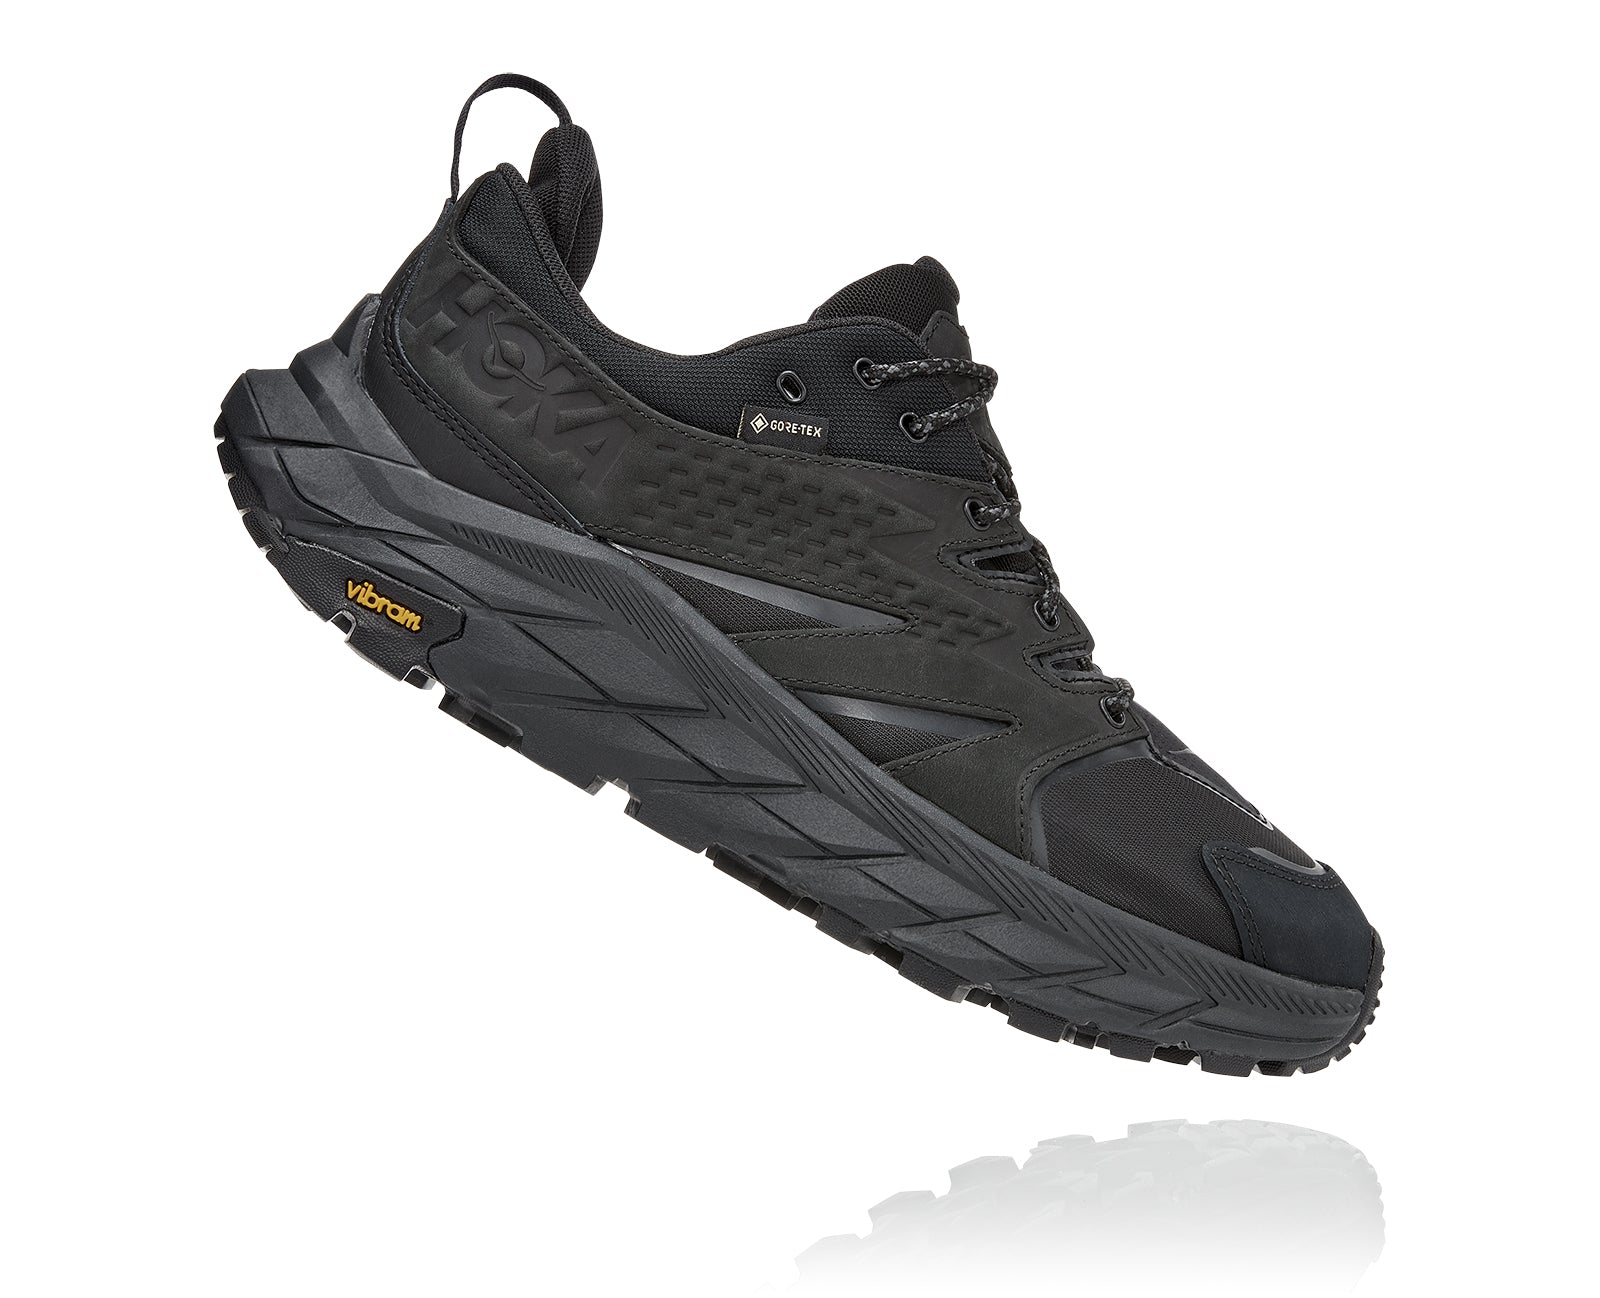 The Men's Anacapa Low GTX is the ideal low-profile hiking shoe.  It's built with all the same great features that has made Hoka famous.  In addition, a Gore-Tex upper with recycled fabric and a gusseted tongue has been added to keep your feet comfortable and safe from the elements.  The 5mm Vibram lugs on the outsole are enough to provide great traction wherever your legs can take you.